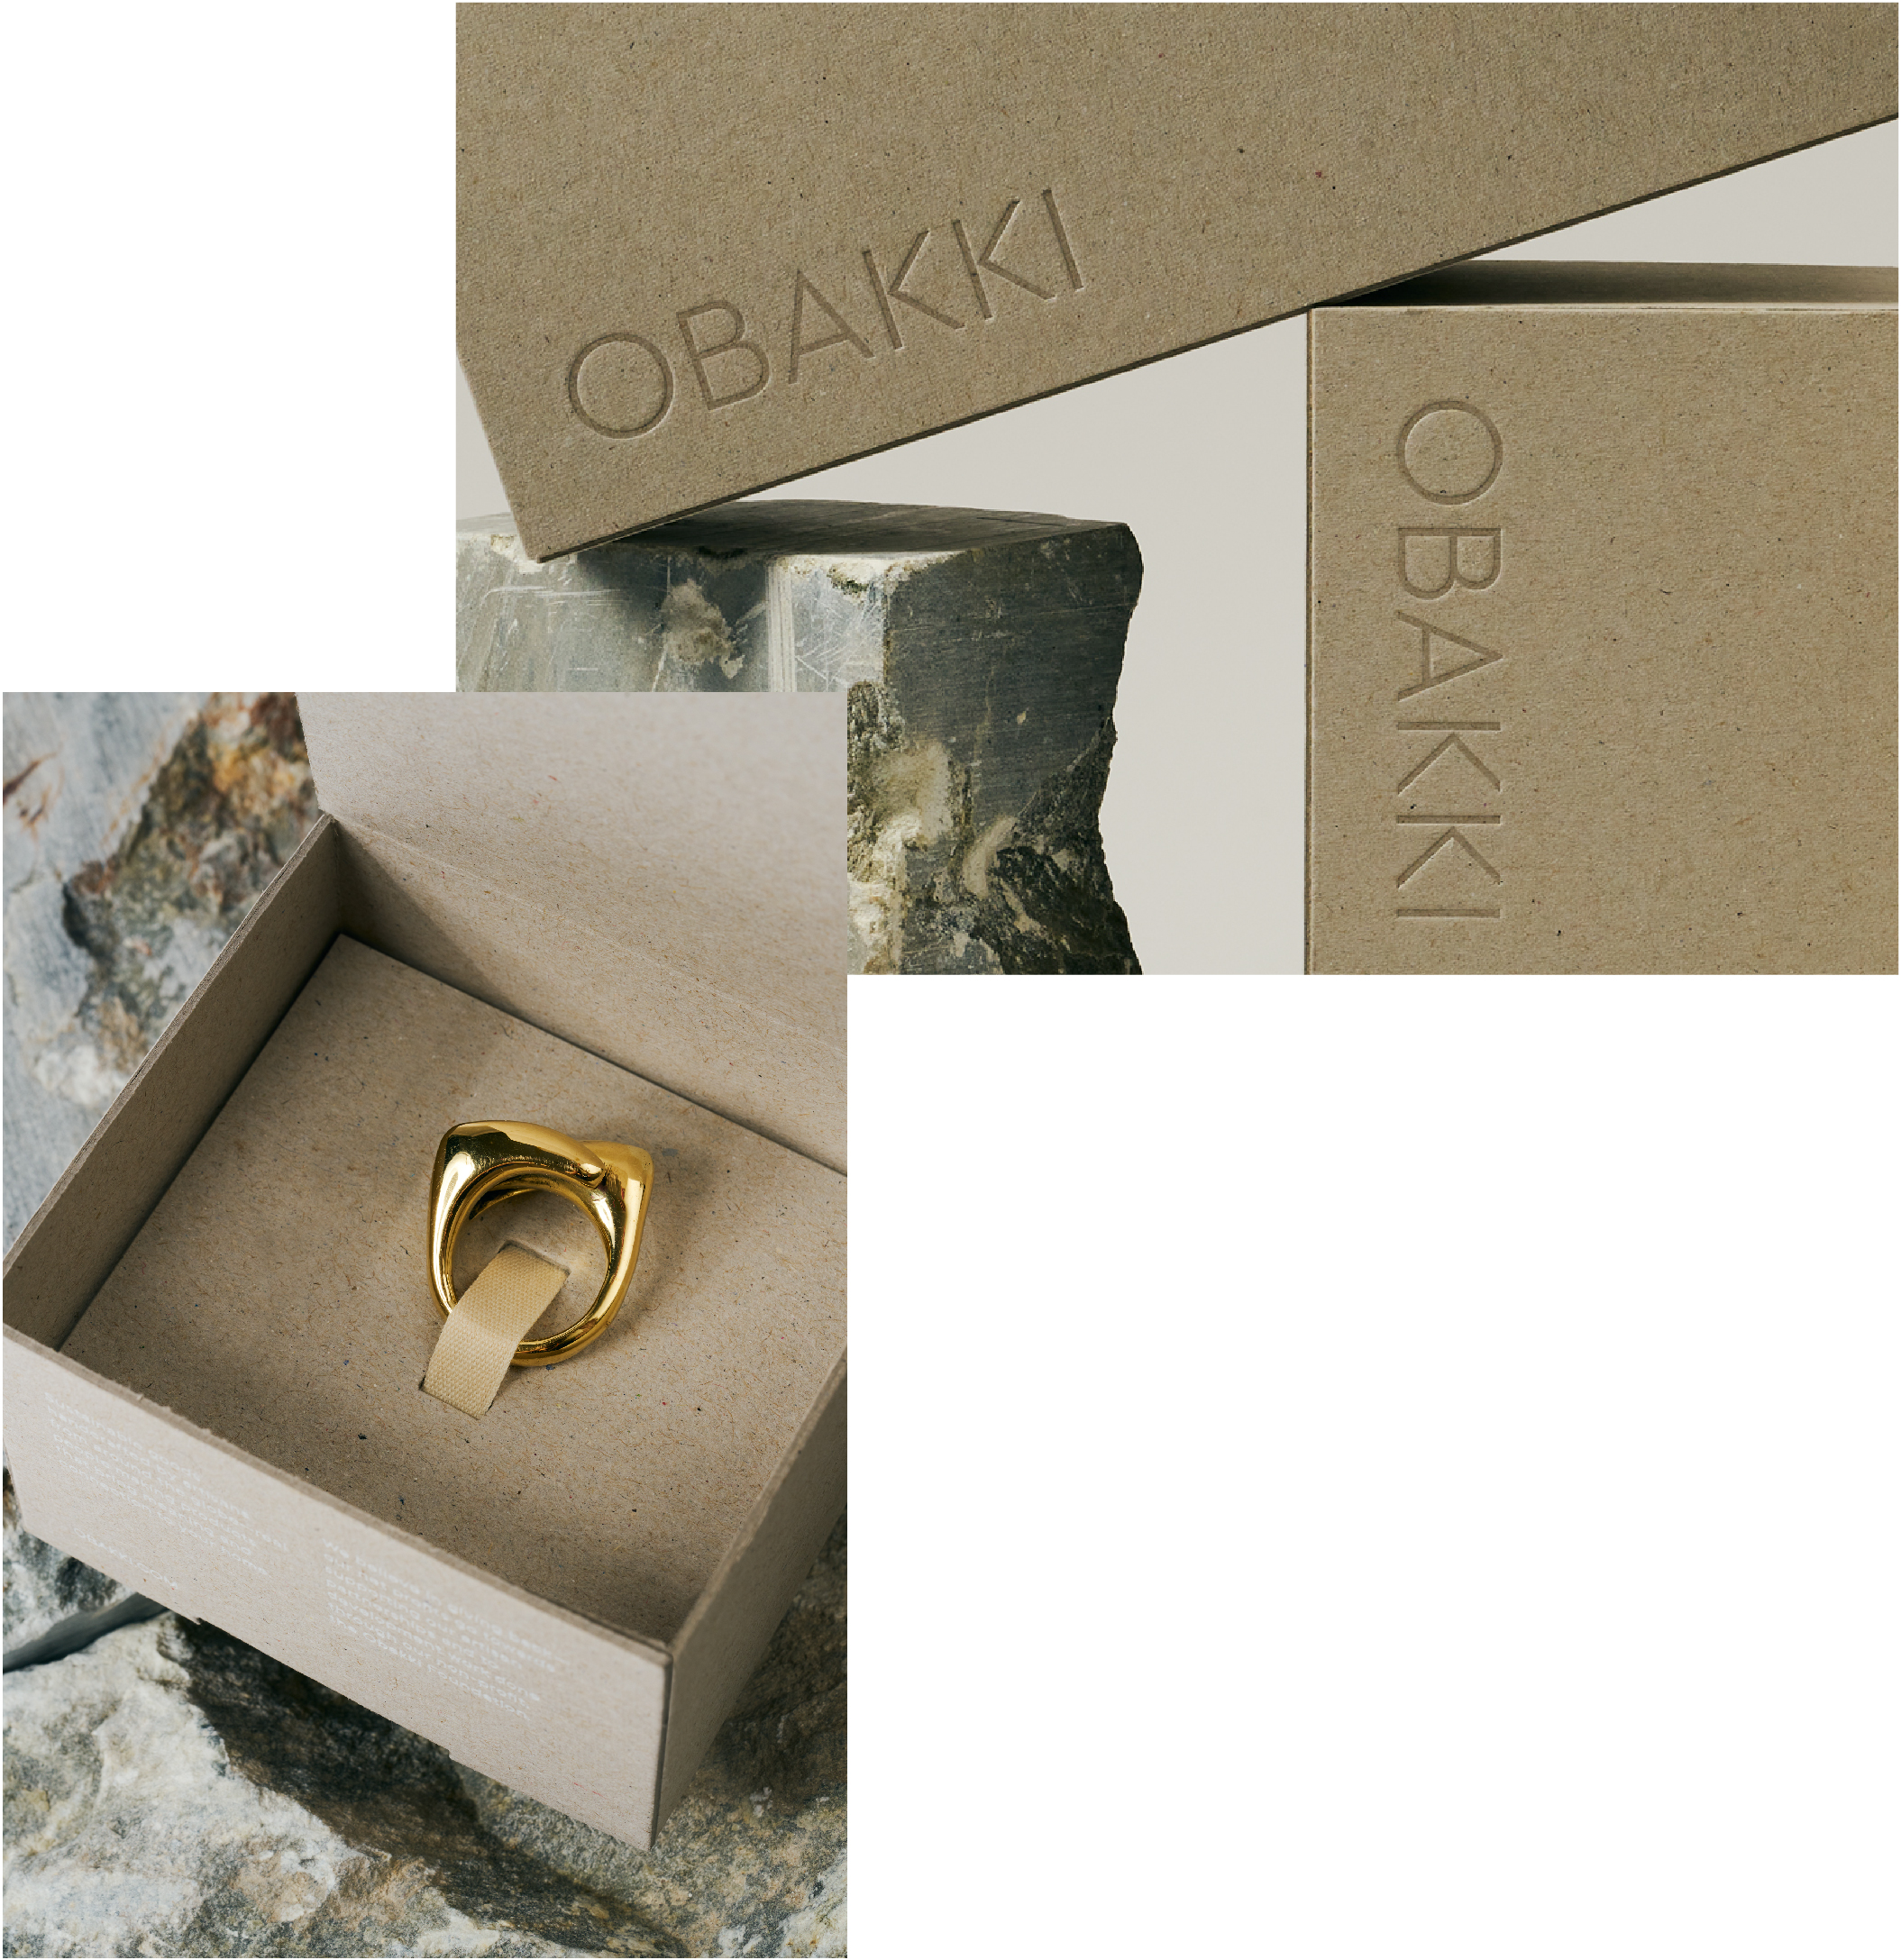 Plastic free packaging design for homewares, jewelry and beauty products for Obakki.